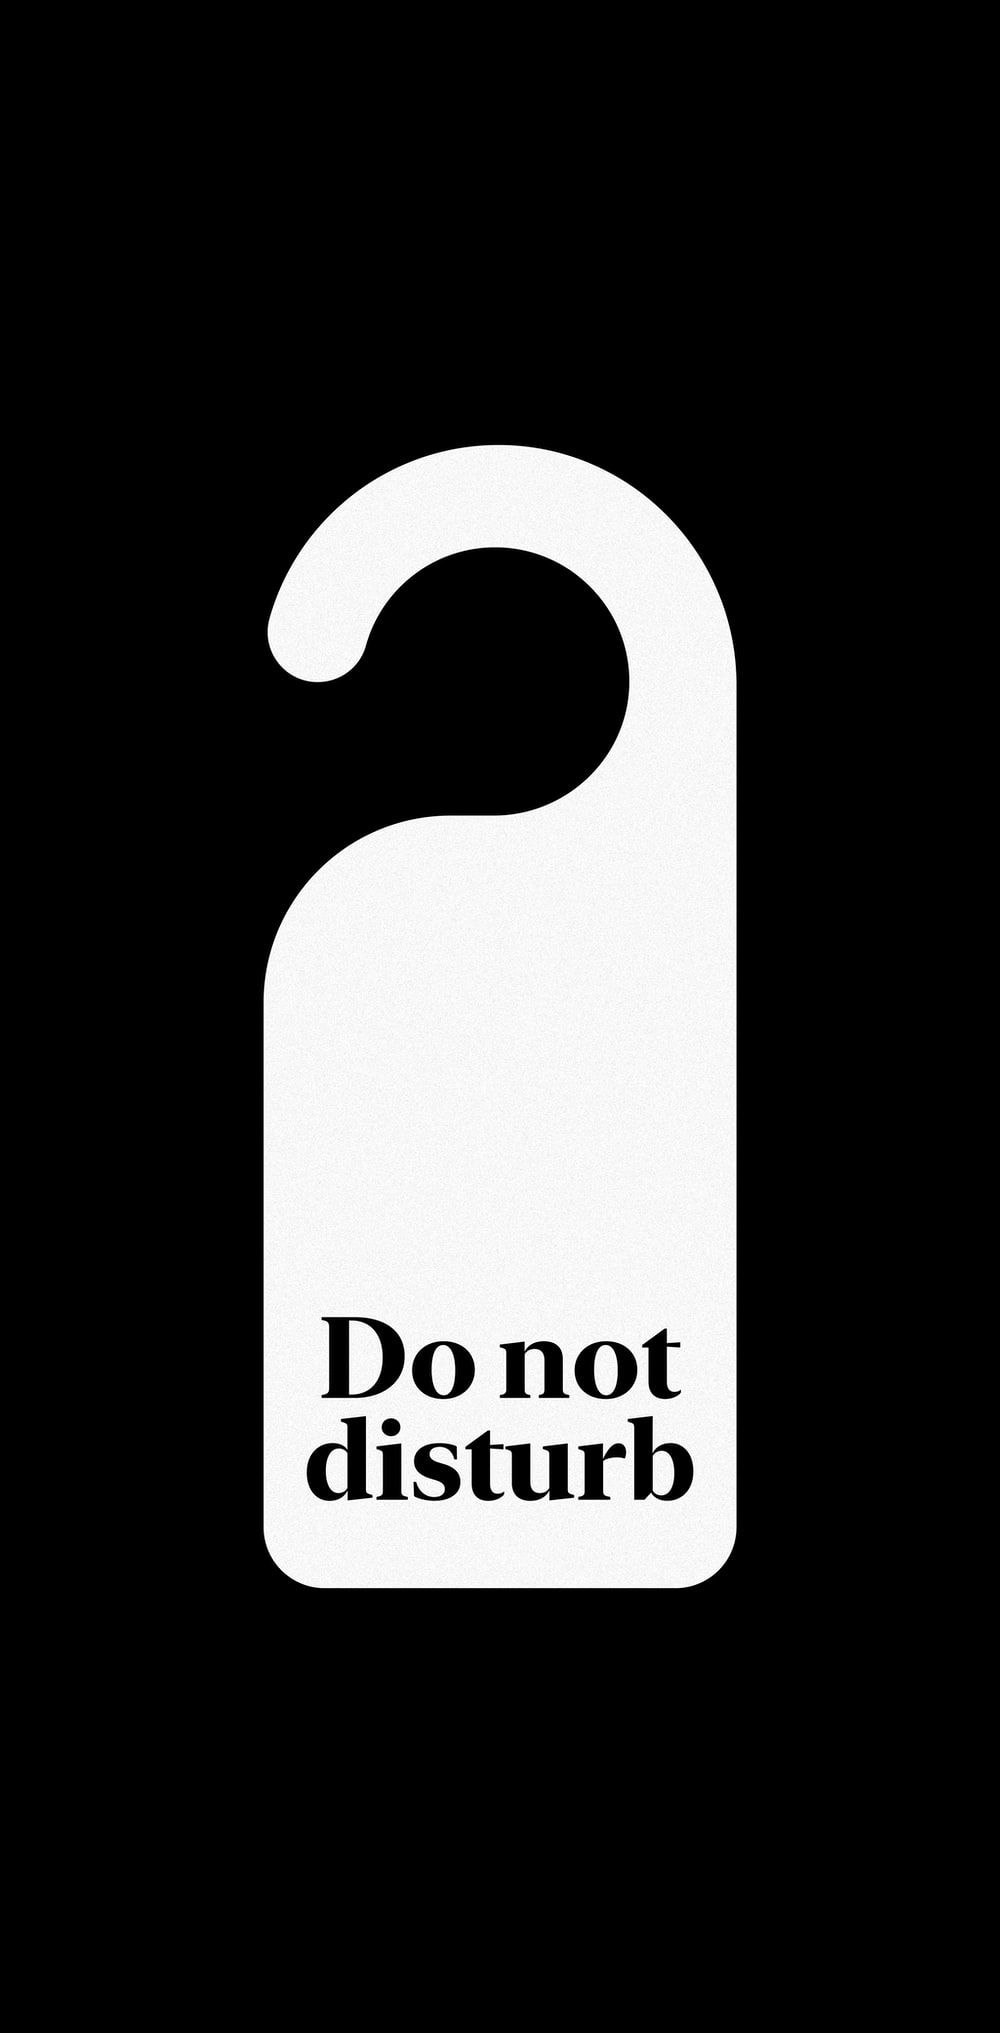 Do Not Disturb Picture. Download Free Image